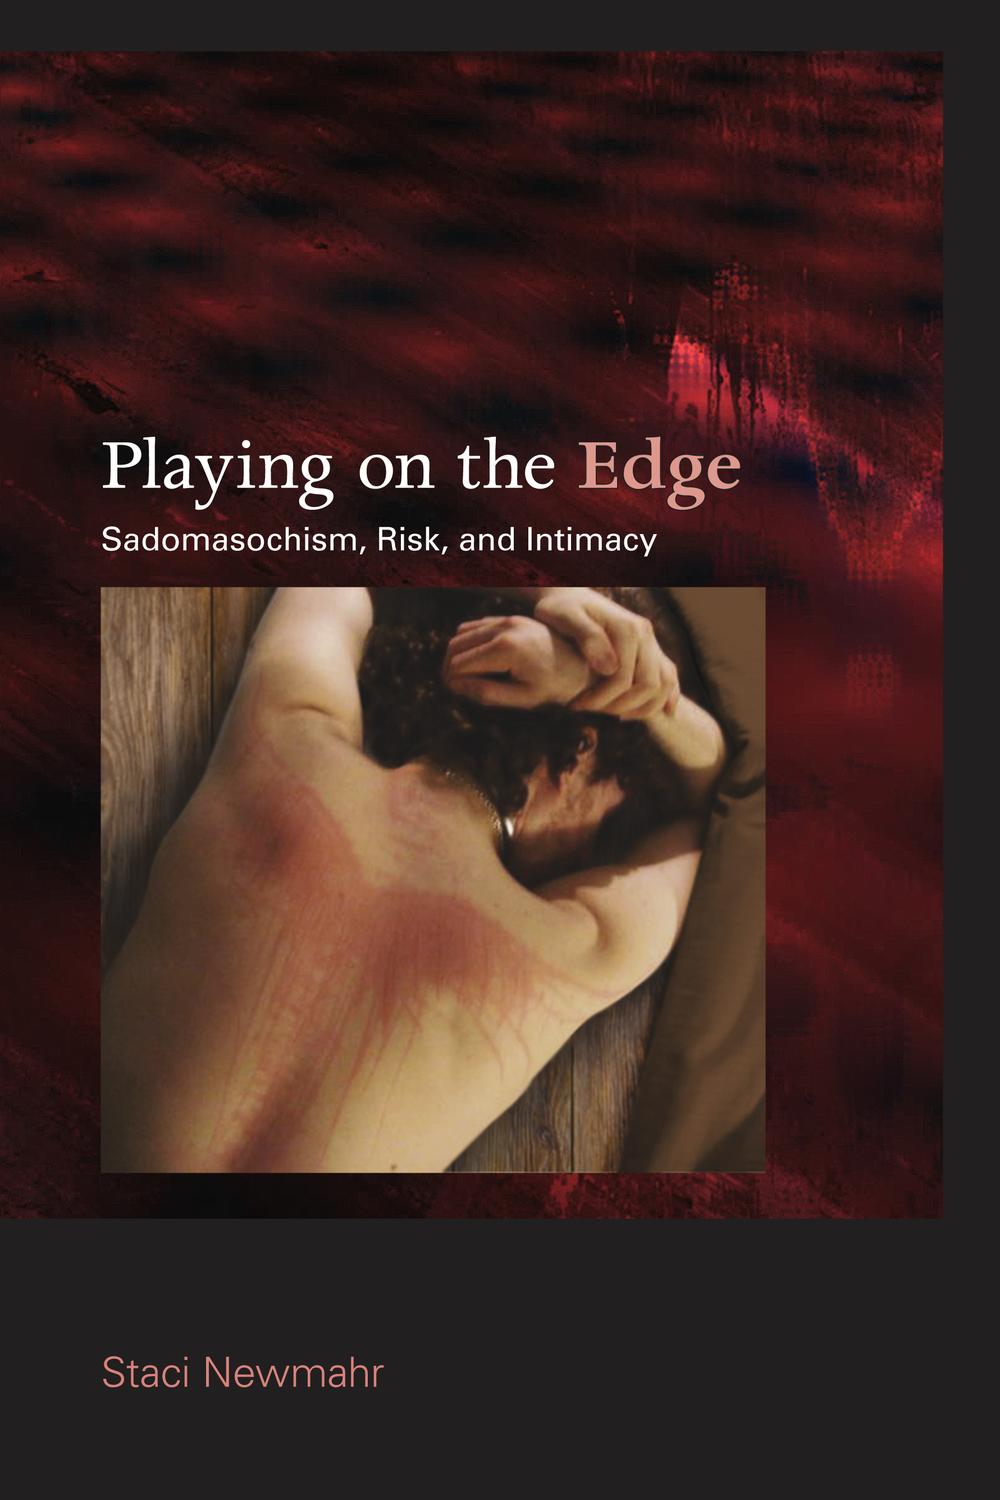 Playing on the Edge - Staci Newmahr